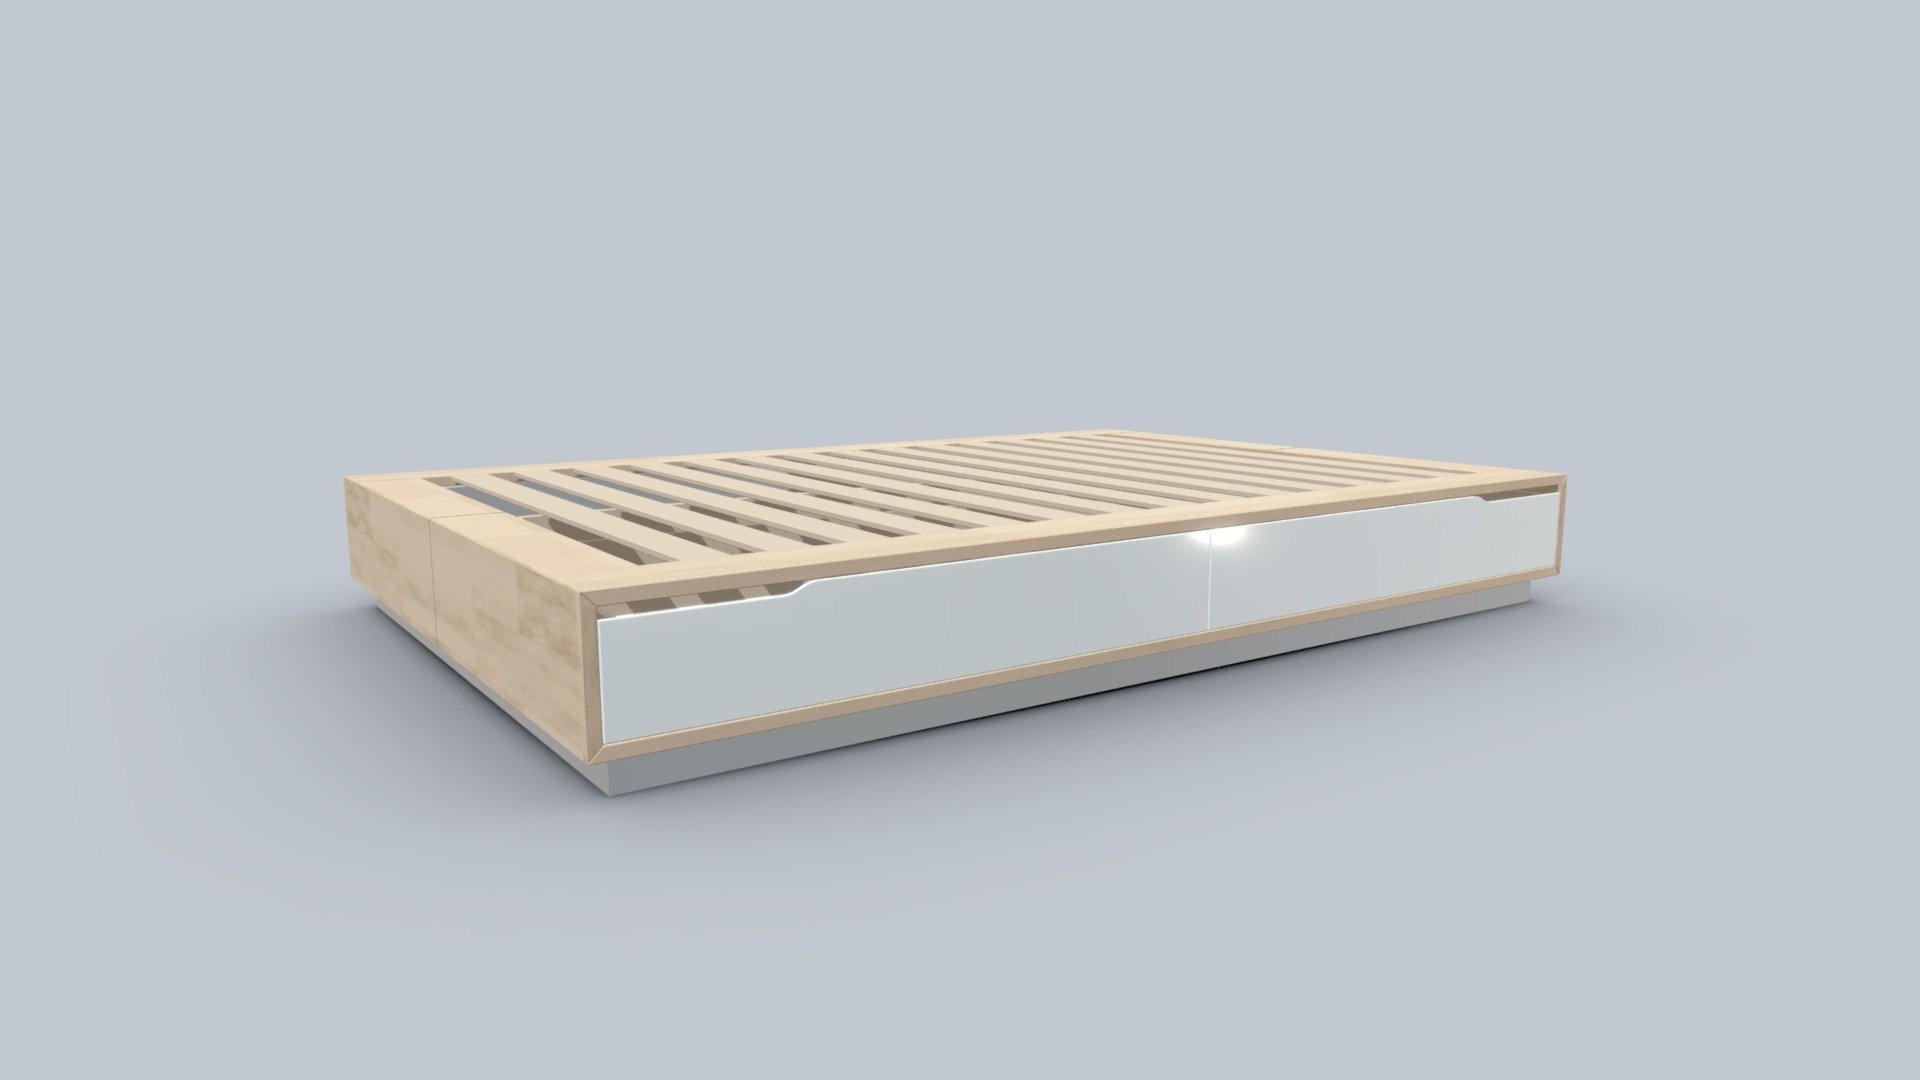 IKEA Bed frame with 4 larges drawer, birch/white 140x202 cm. 
Ref IKEA: 102.804.82

Birch wood is texture with a 4096px image texture, other part is vertex color.

Made in Blender 3d model